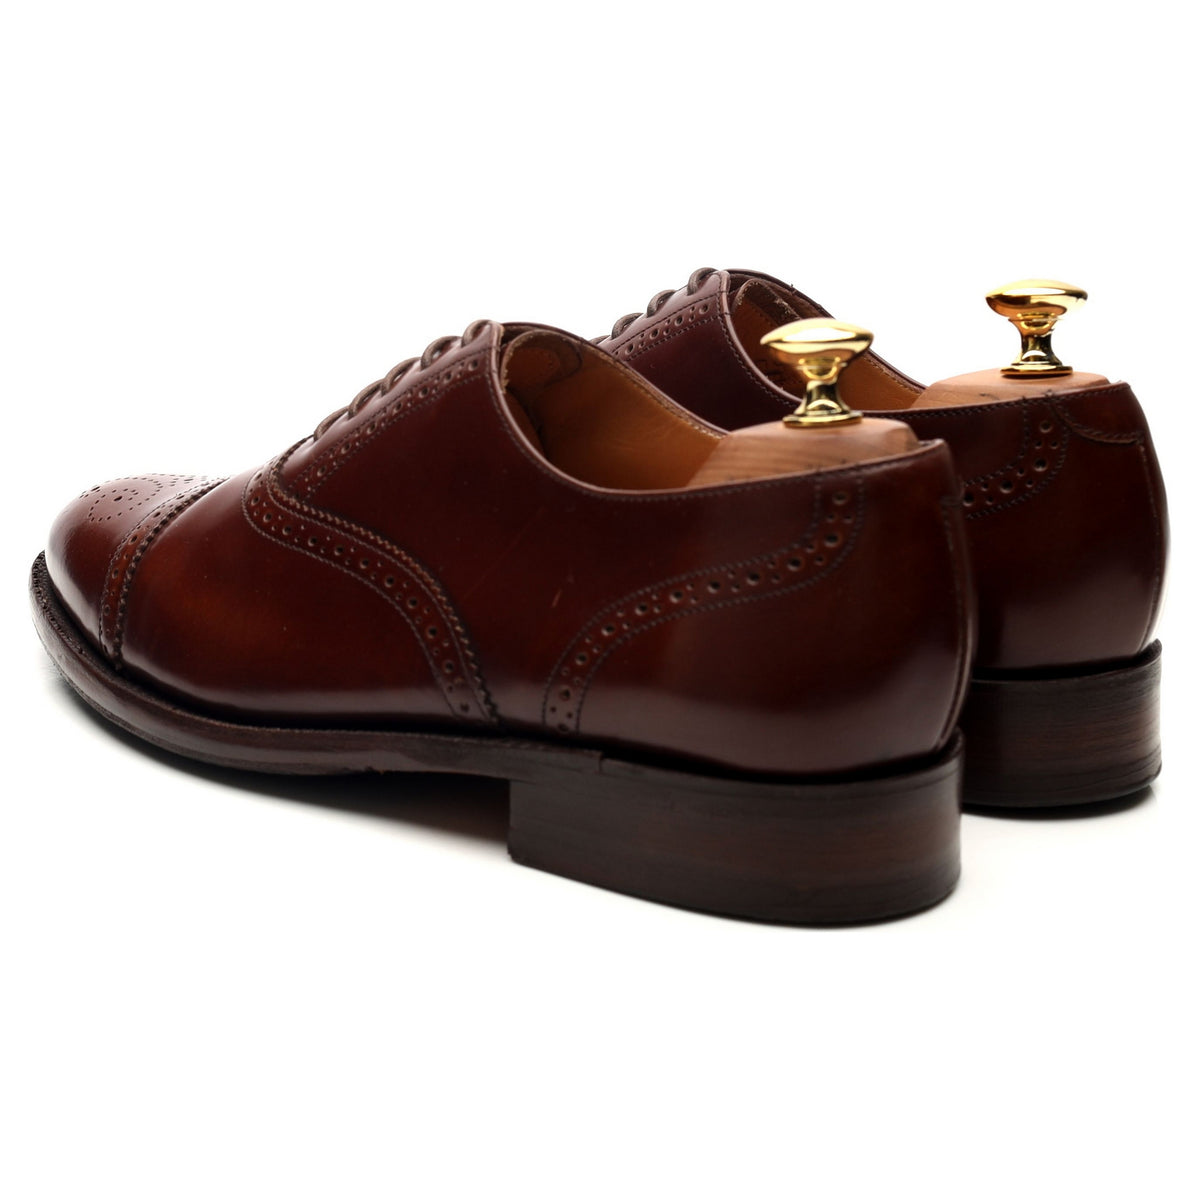 Brown Leather Oxford Brogues UK 6 G